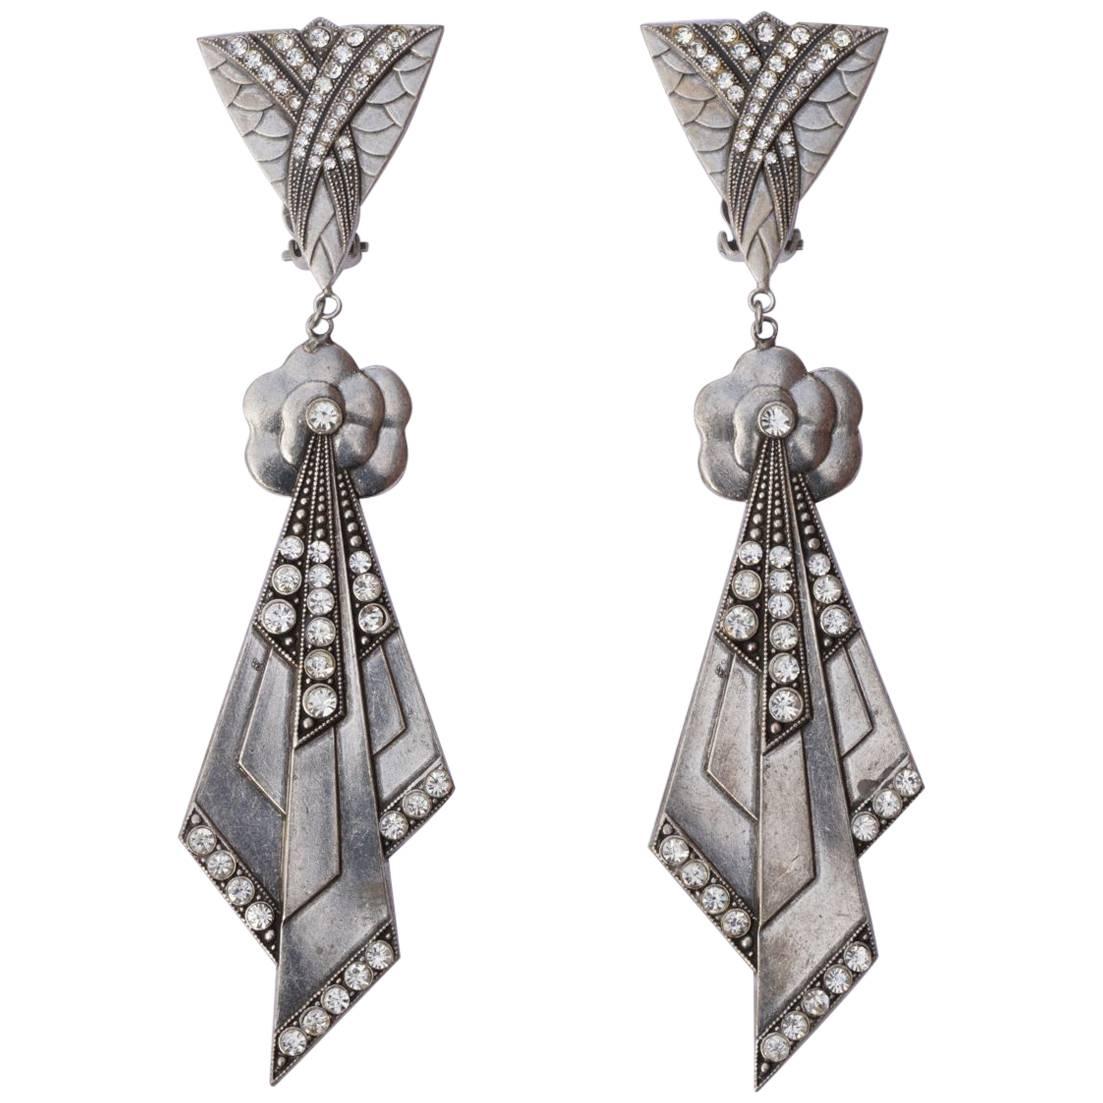 Pierre Bex Art Deco style Silver Plated and Rhinestone Drop Statement Earrings